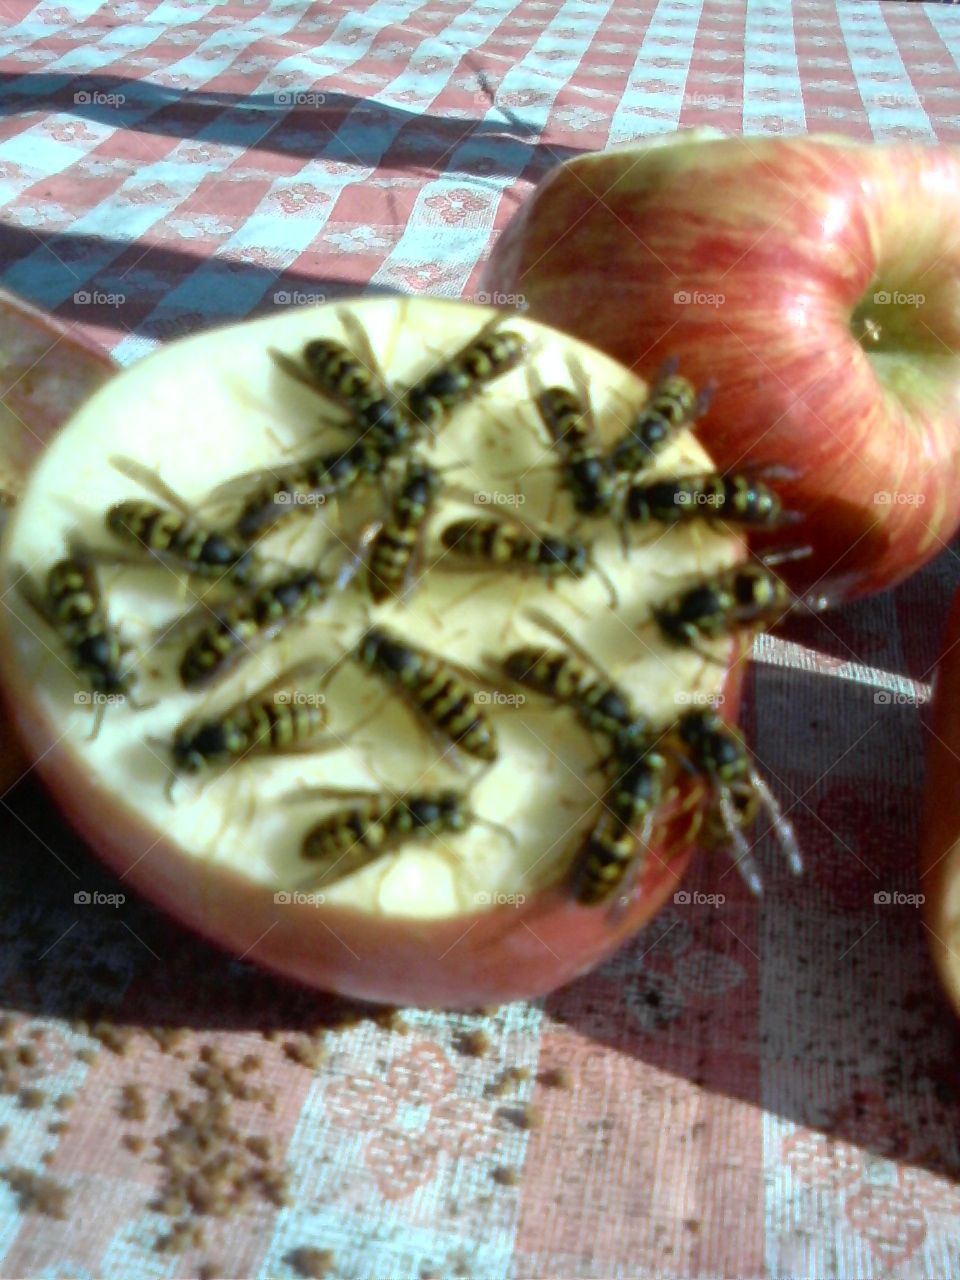 Bees on an Apple